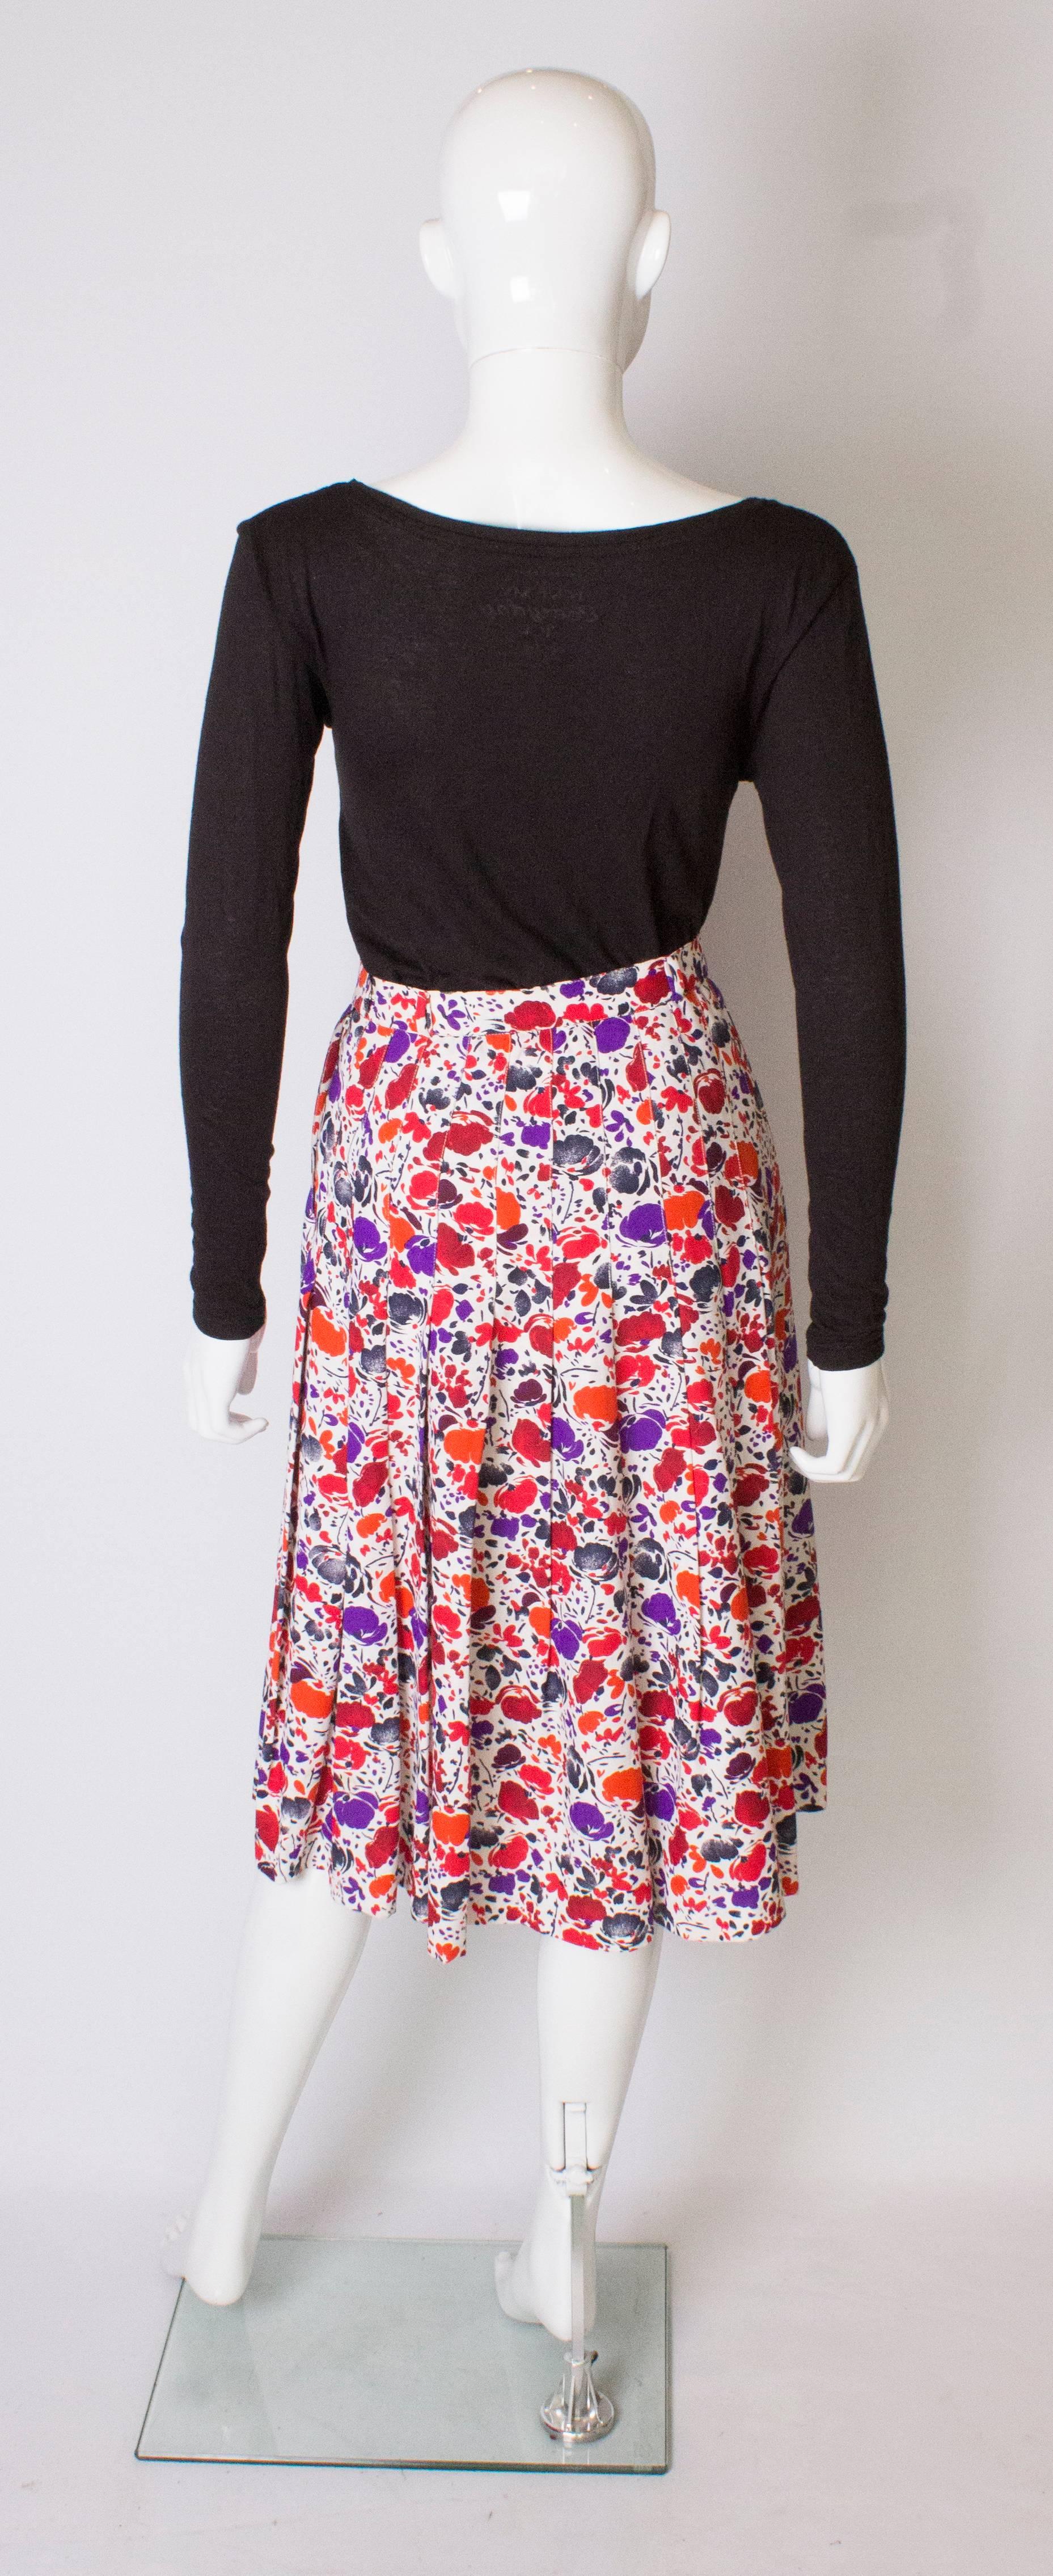 A vintage 1980s floral printed pleated numbered Skirt by Jean Louis Scherer 2